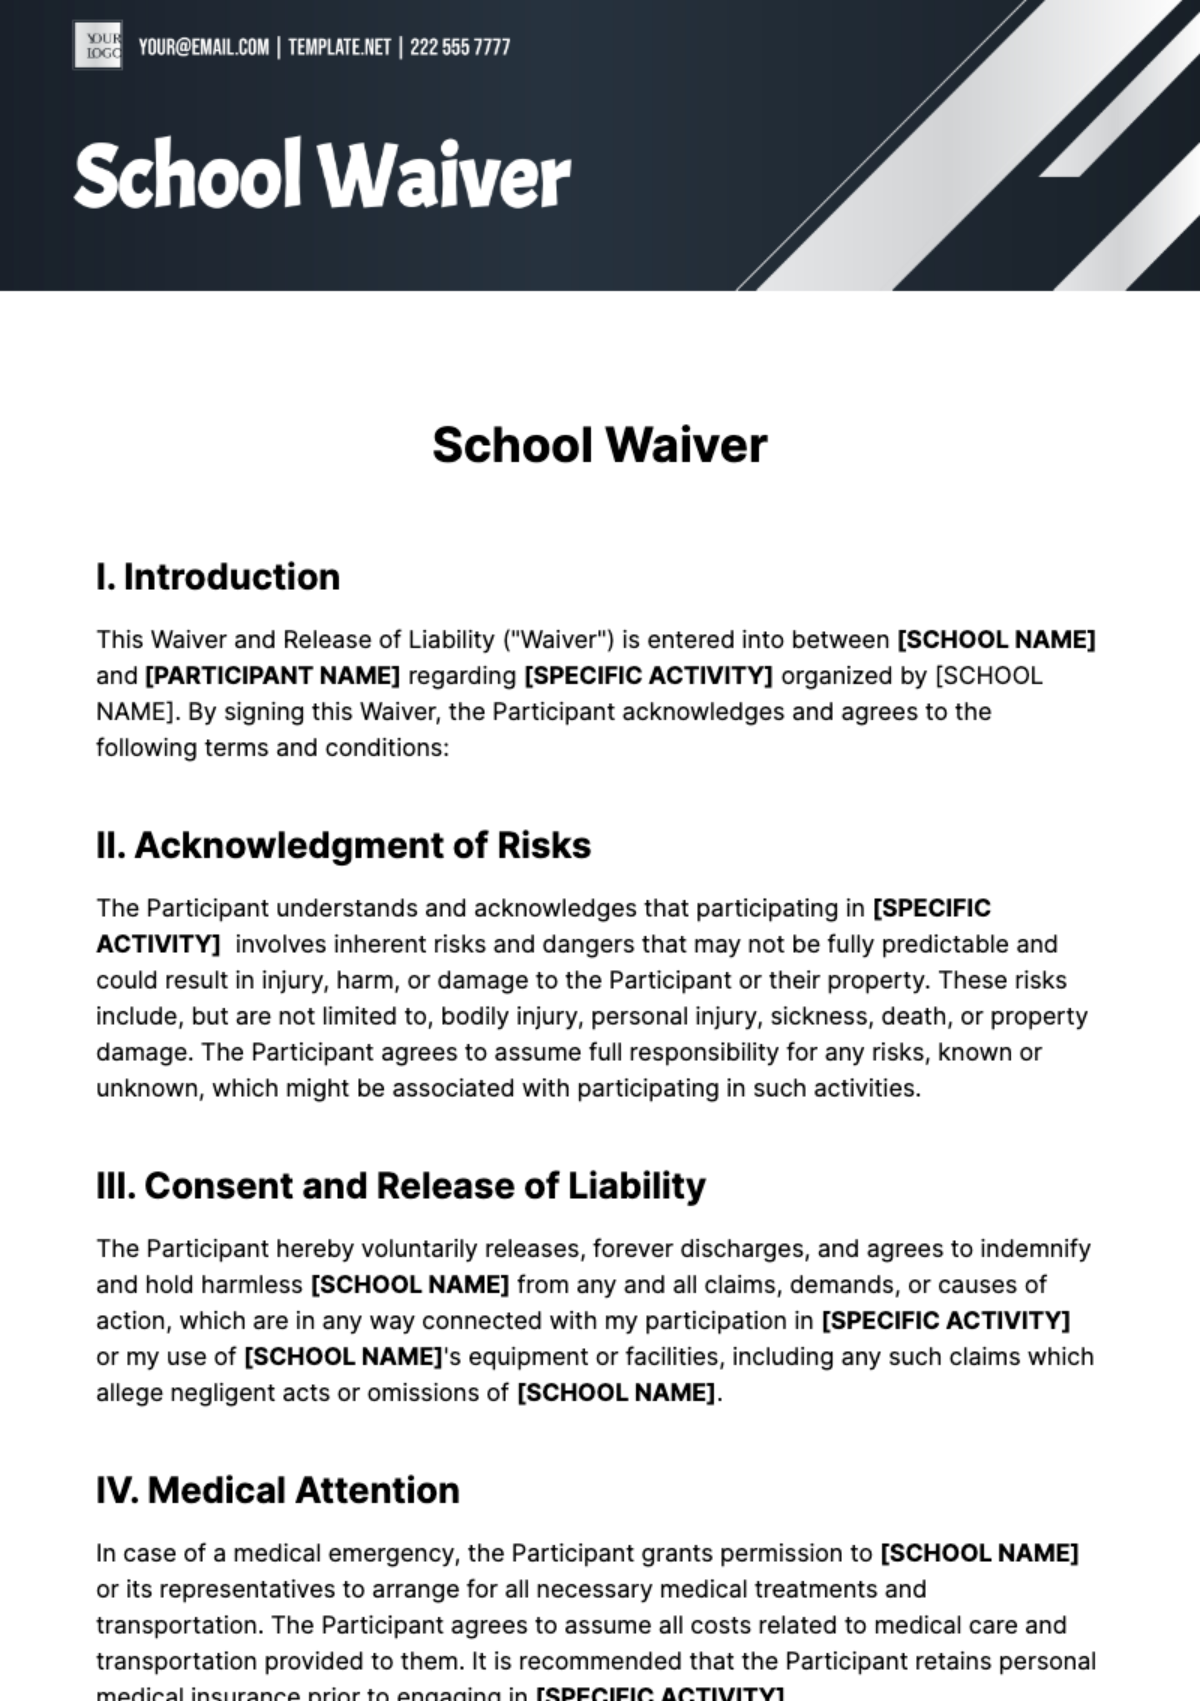 Free School Waiver Template